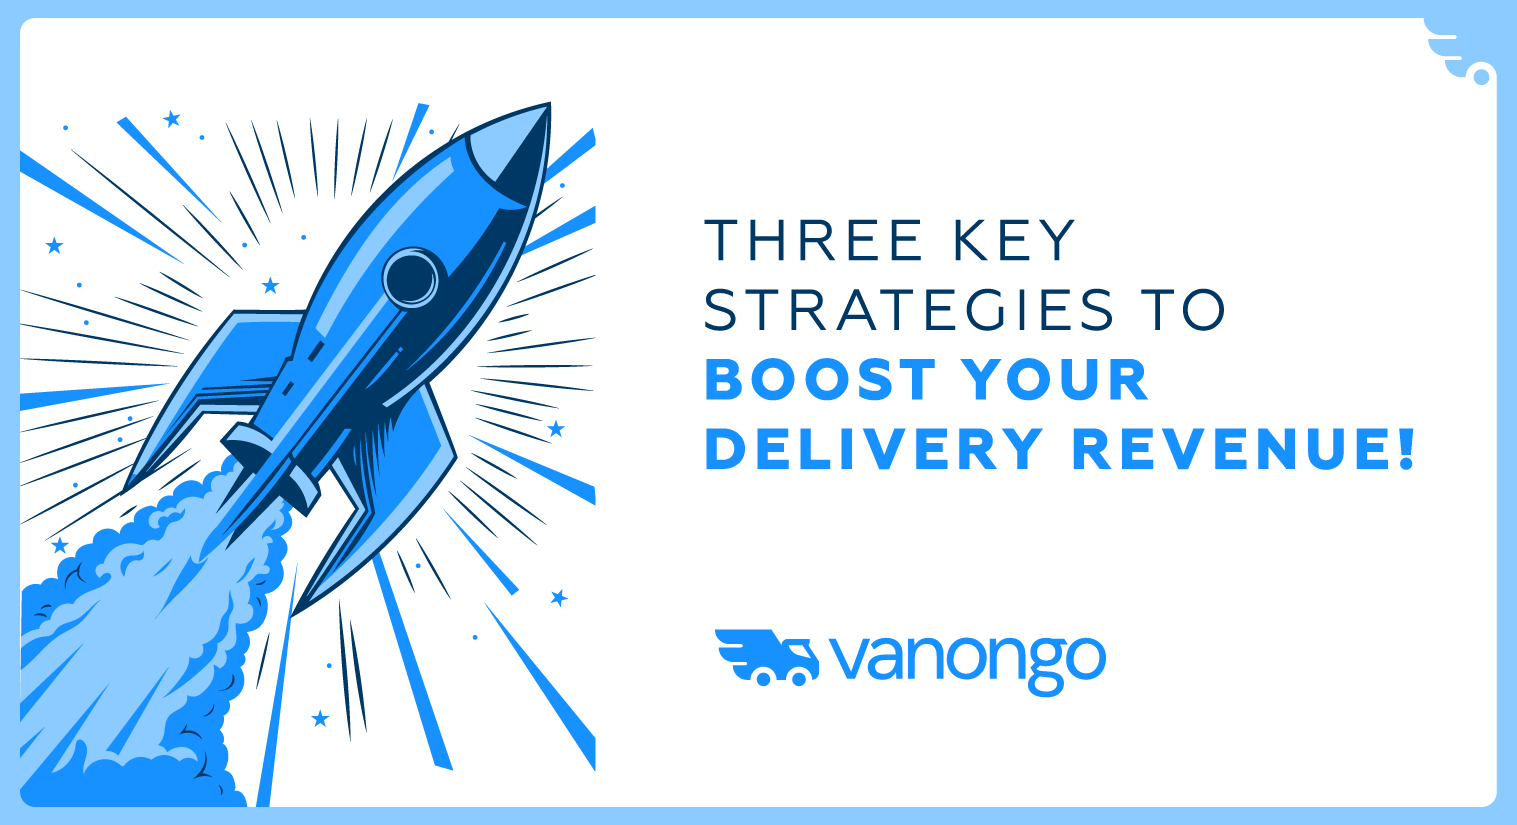 Key strategies to boost your delivery revenue